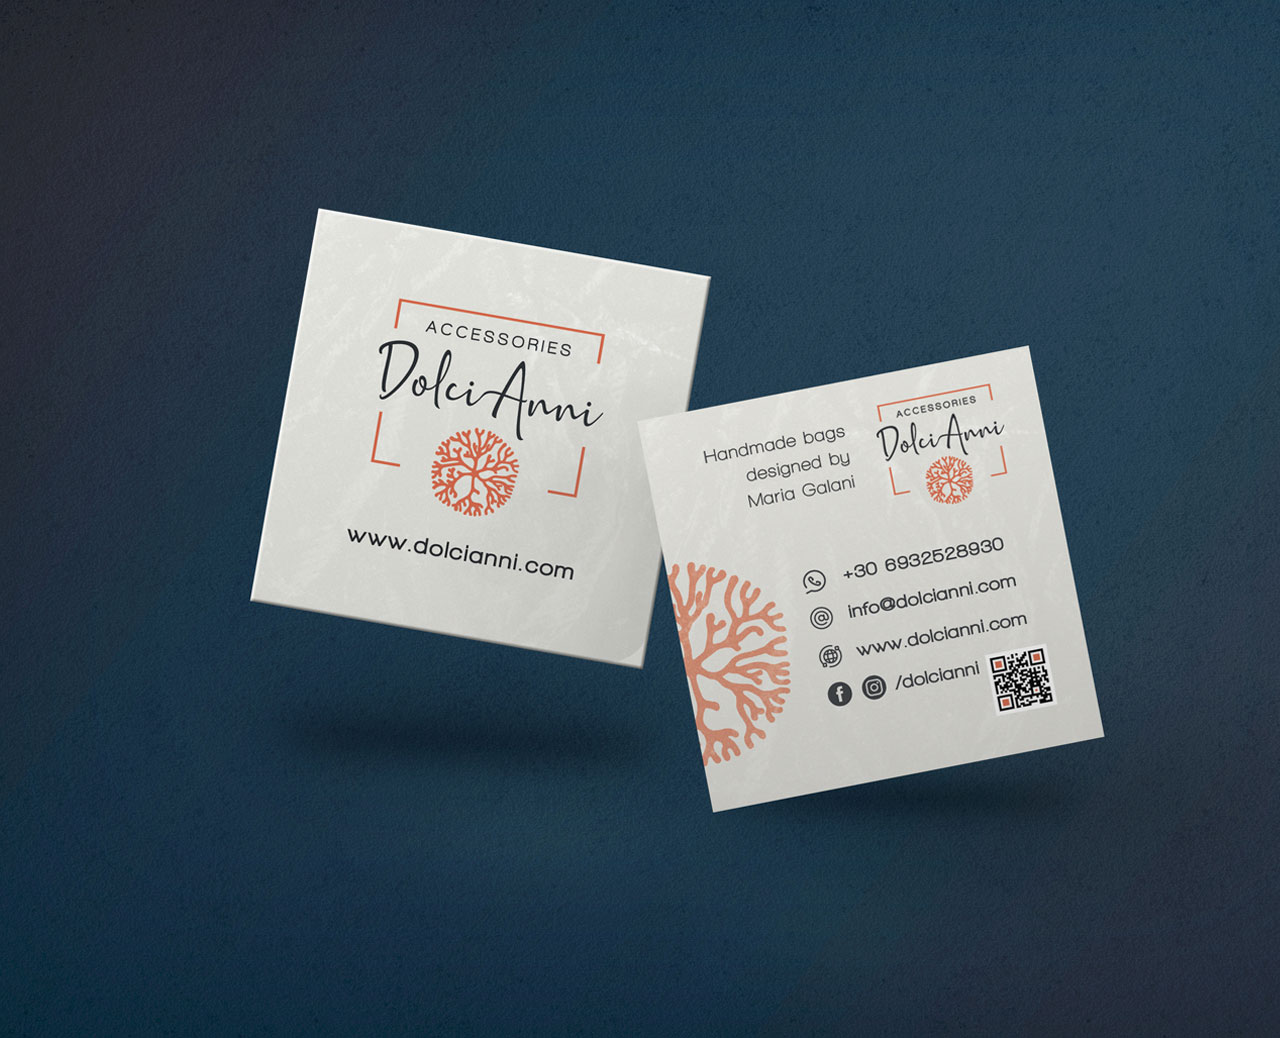 Dolcianni Business card